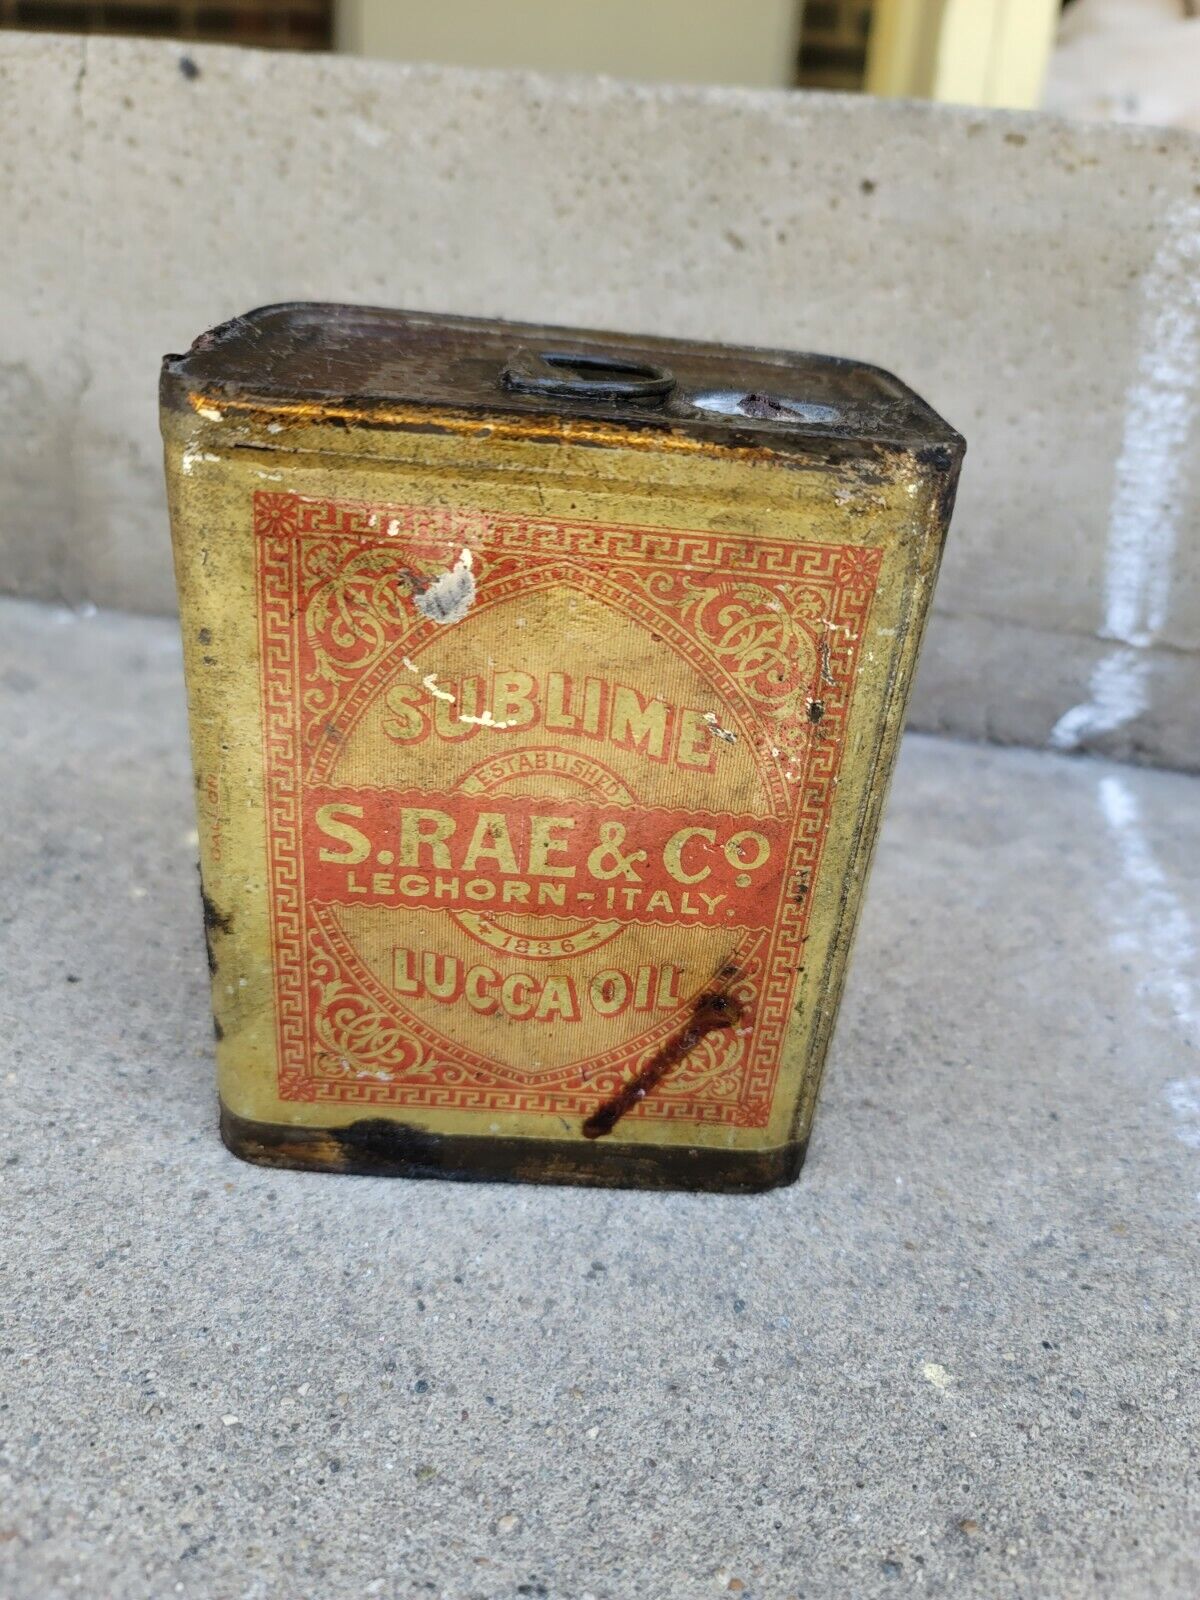 VINTAGE Lucca SUBLIME S.RAE. CO. LEGHORN ITALY Olive Oil Can Canned 